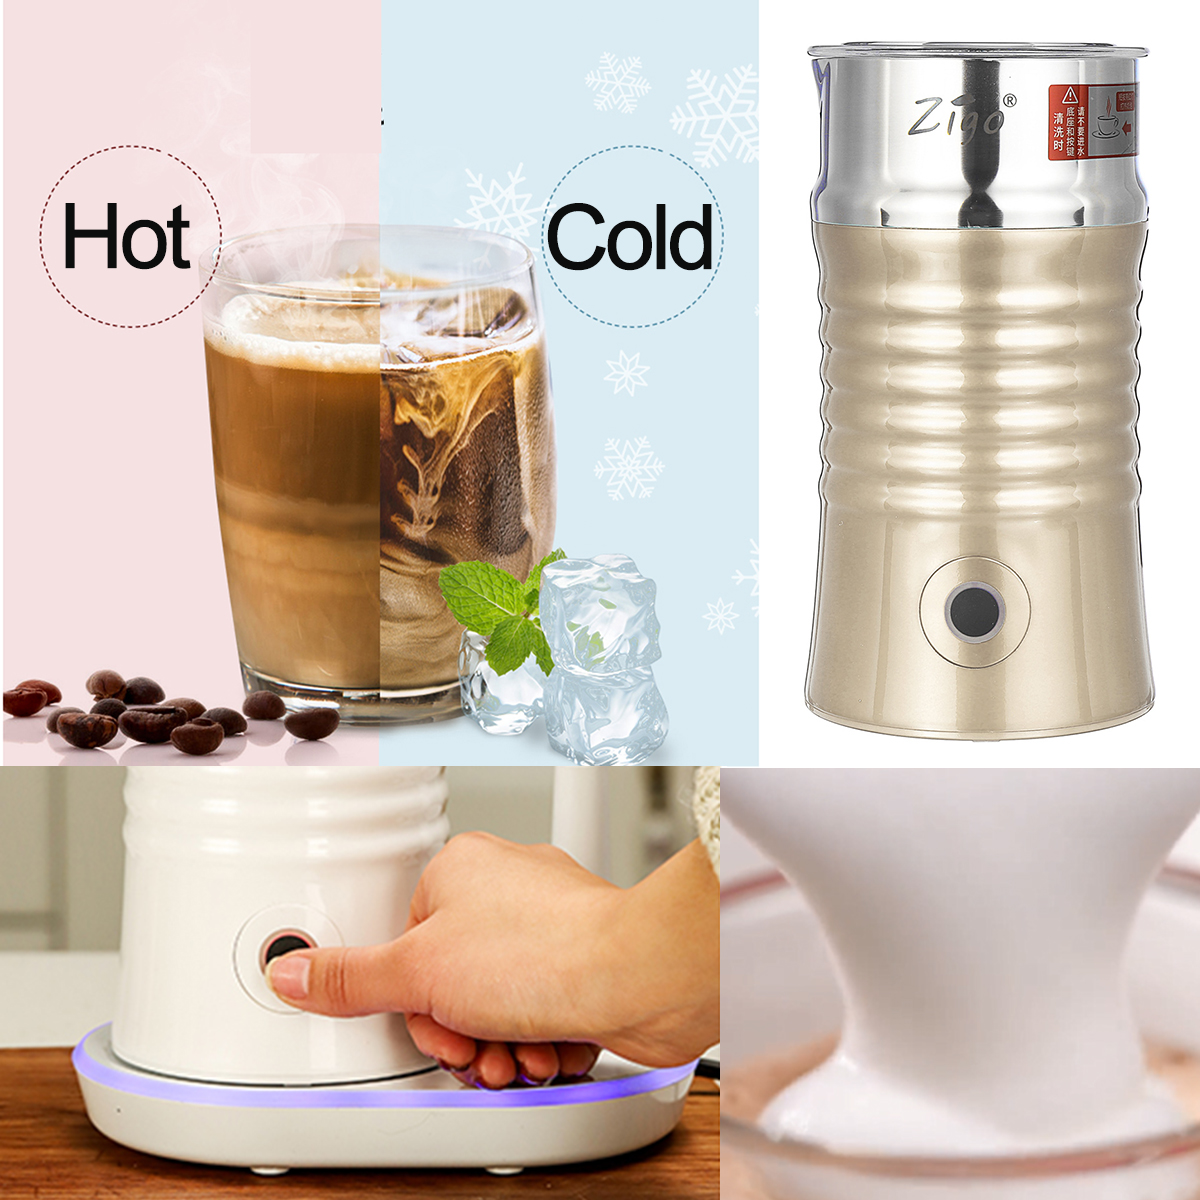 Automatic Electric Milk Frother Warmer Cold Coffee Heater Foam Maker Machine 220V (Gold) 44